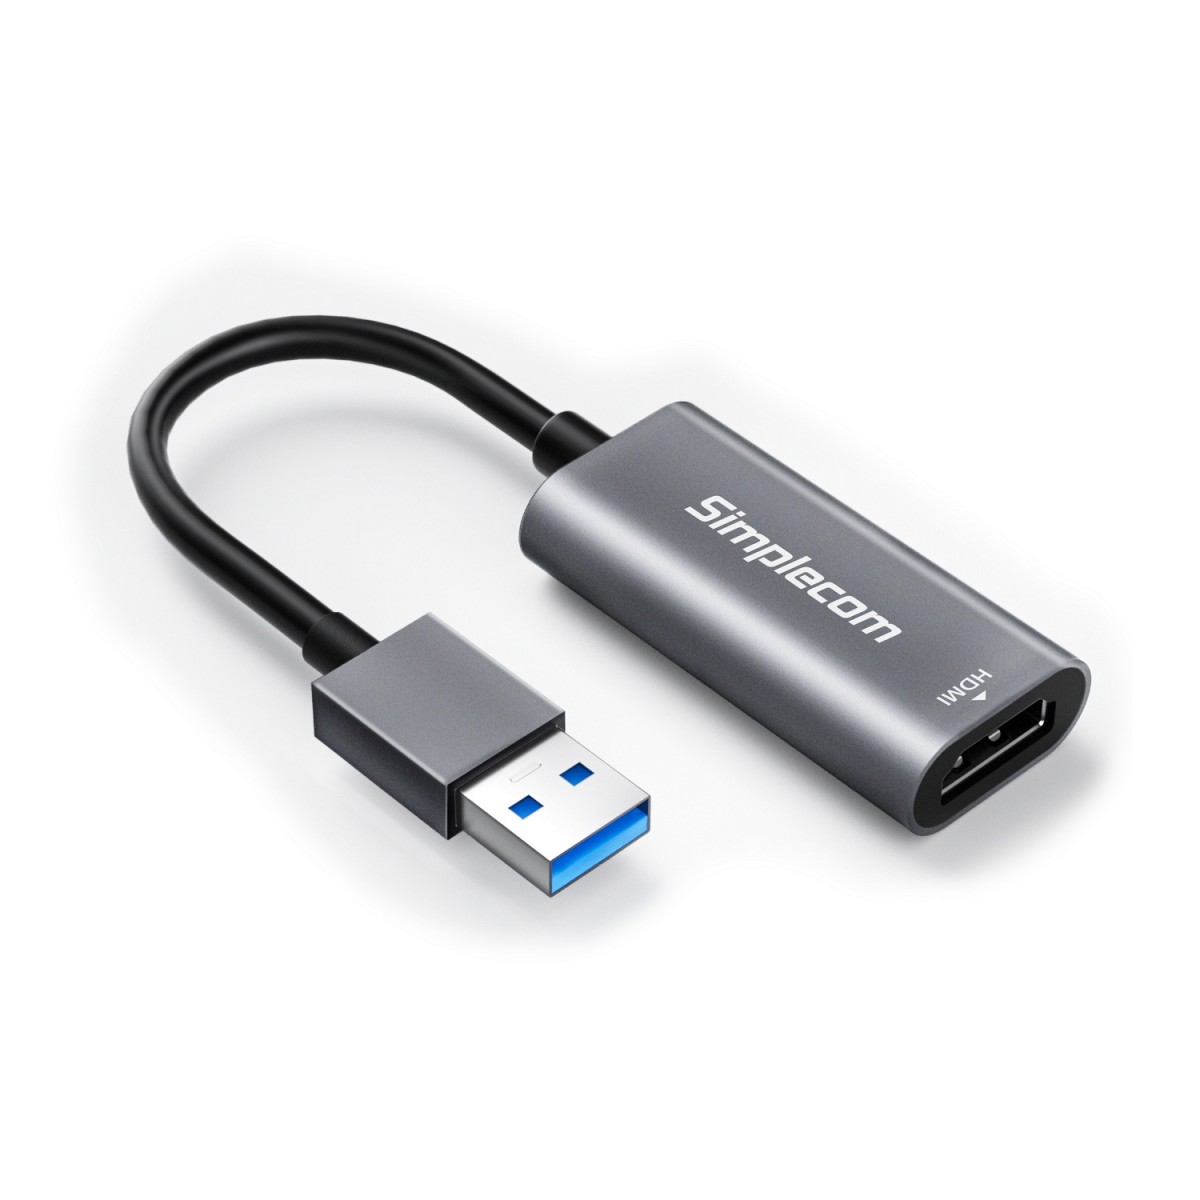  USB to HDMI Video Card Adapter Full HD 1080p  